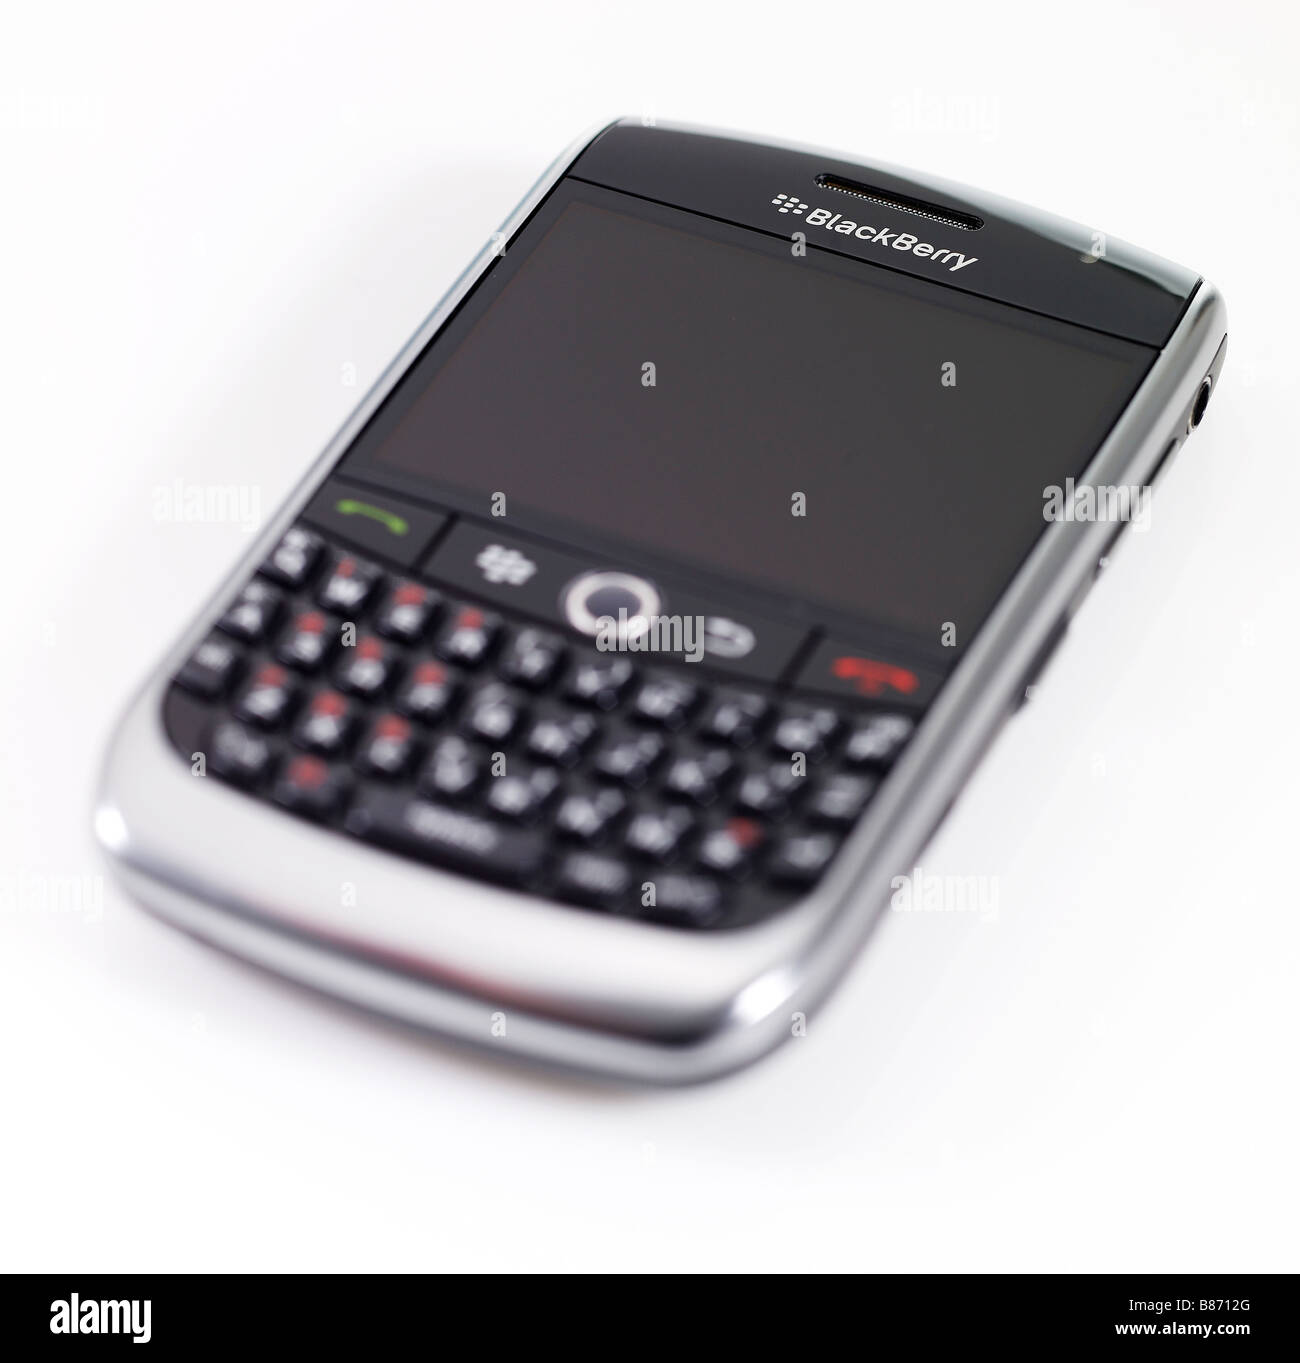 Studio shot of a Blackberry phone 8900 on a white background Stock Photo